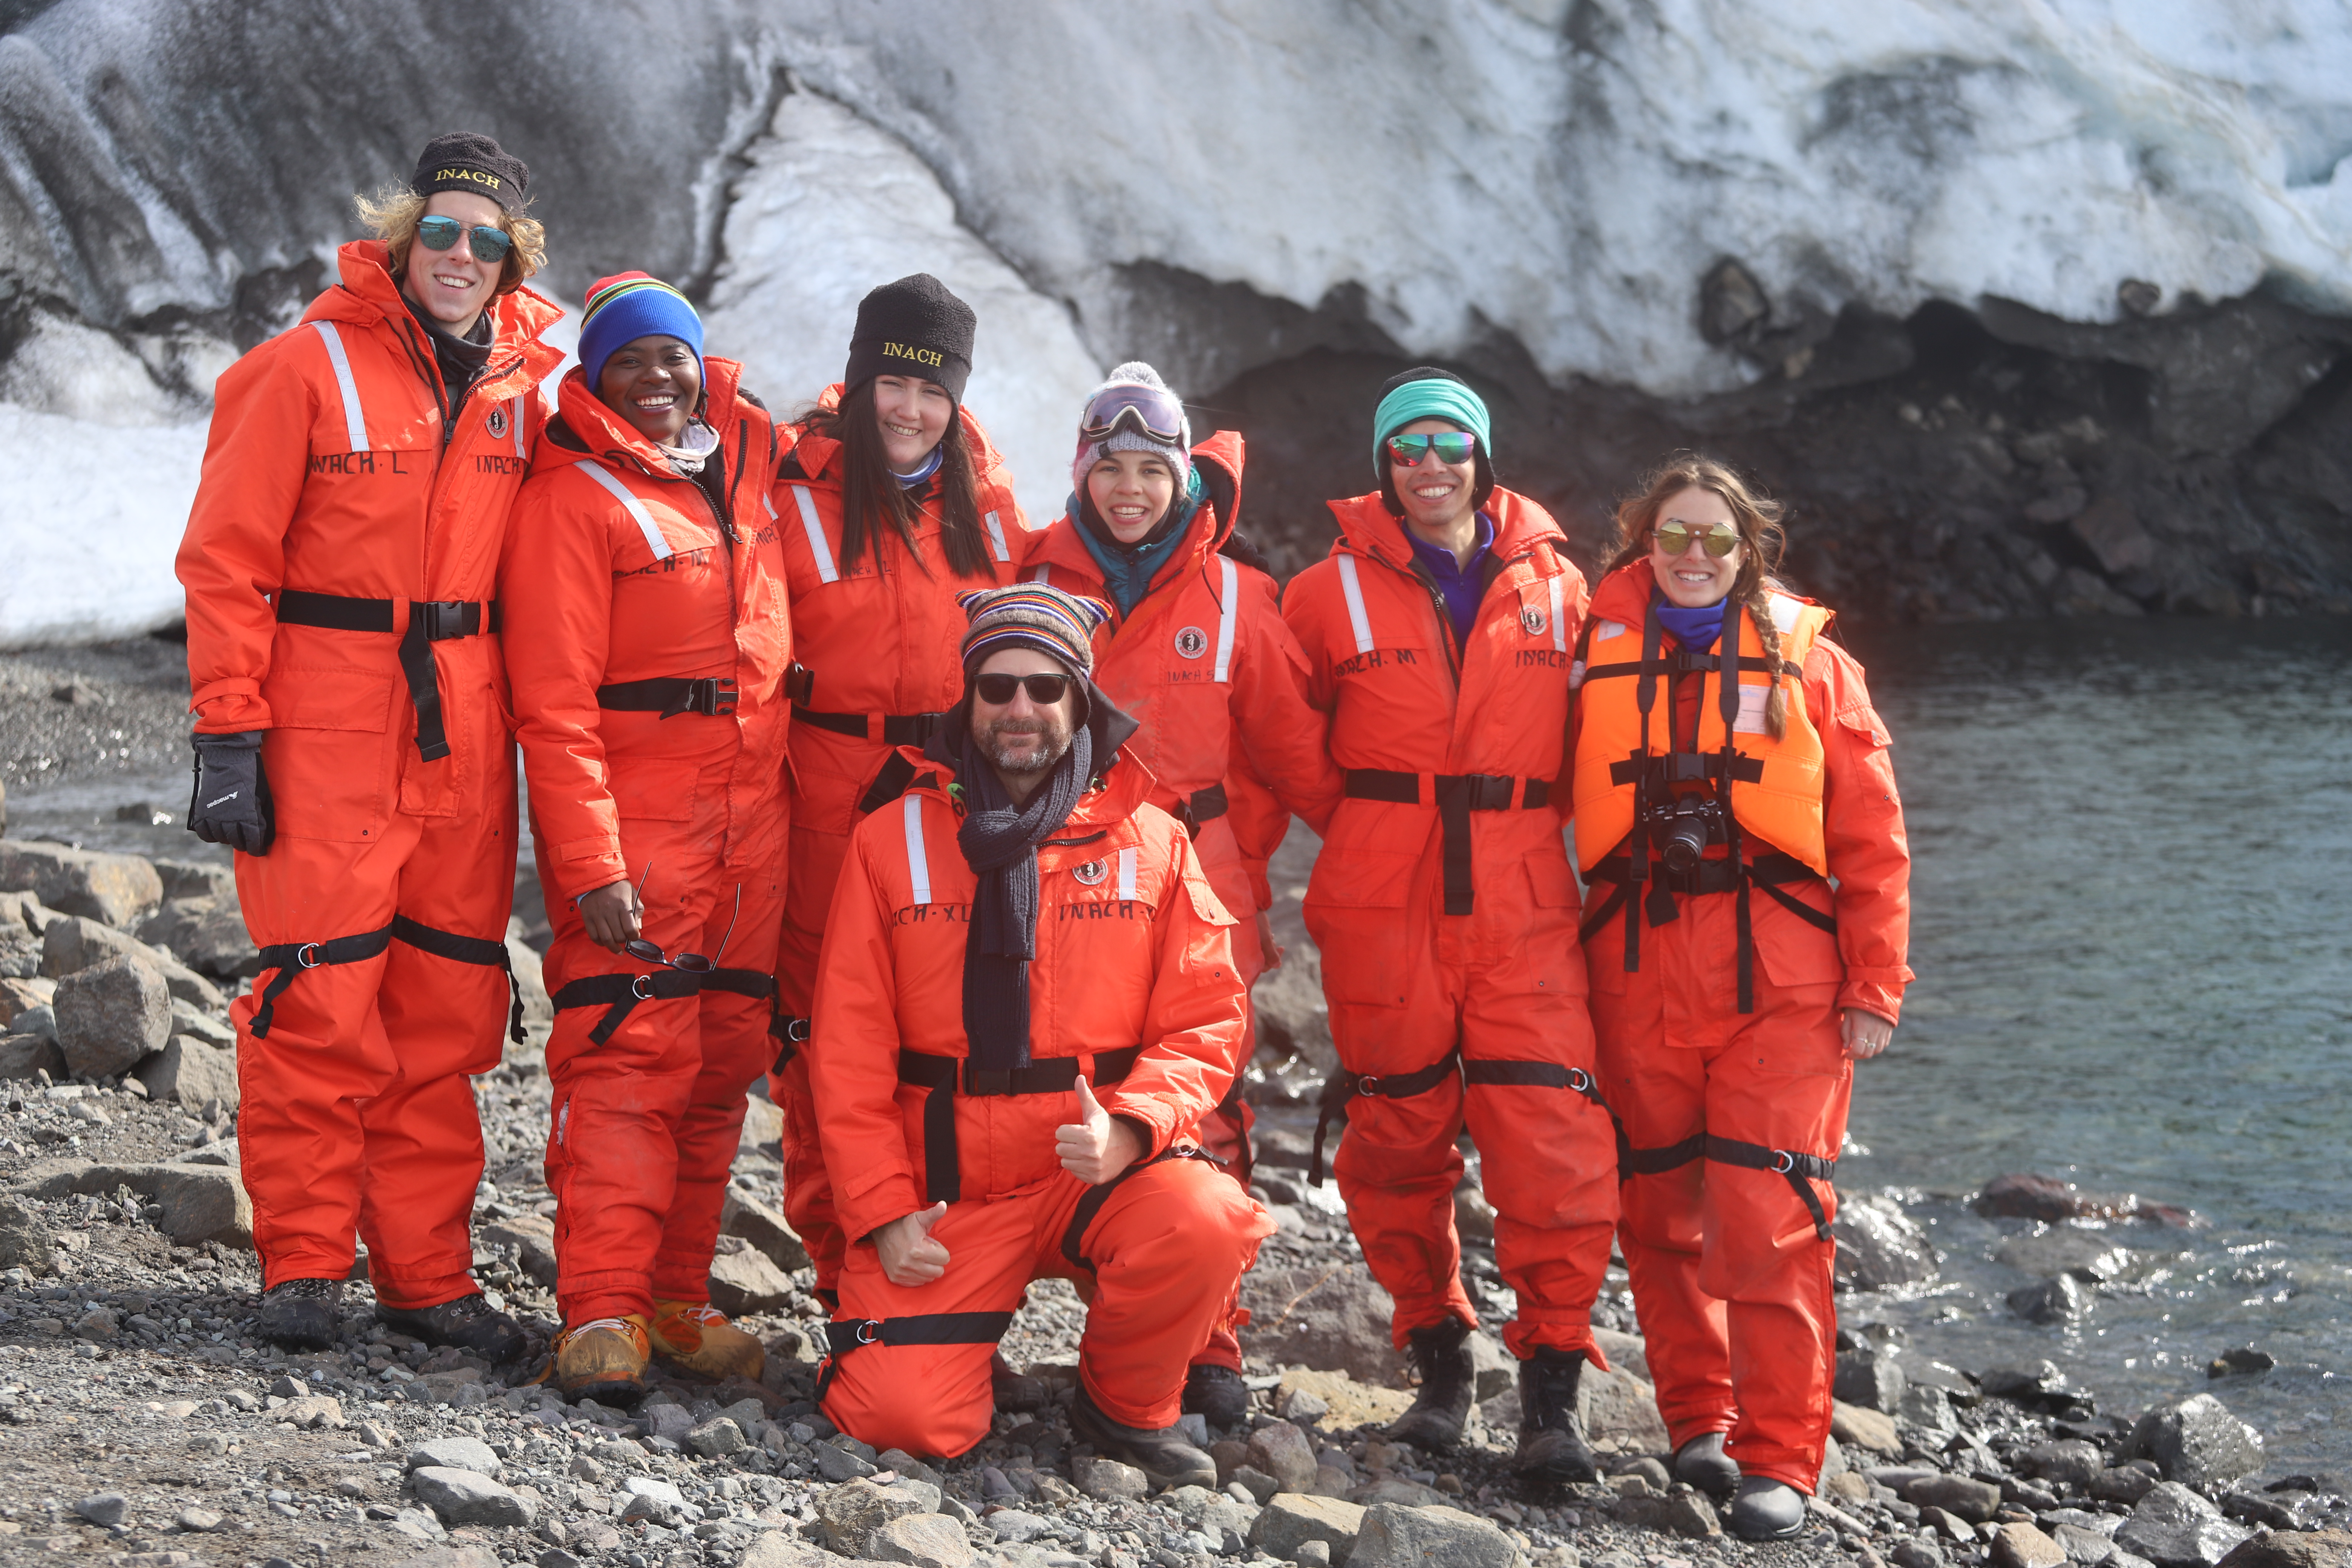 Project Leader, Juan Salazar in Antarctica in February 2020 with the young leaders from the Antarctic Cities Youth Expedition representing Hobart, Christchurch, Cape Town, Ushuaia and Punta Arenas.